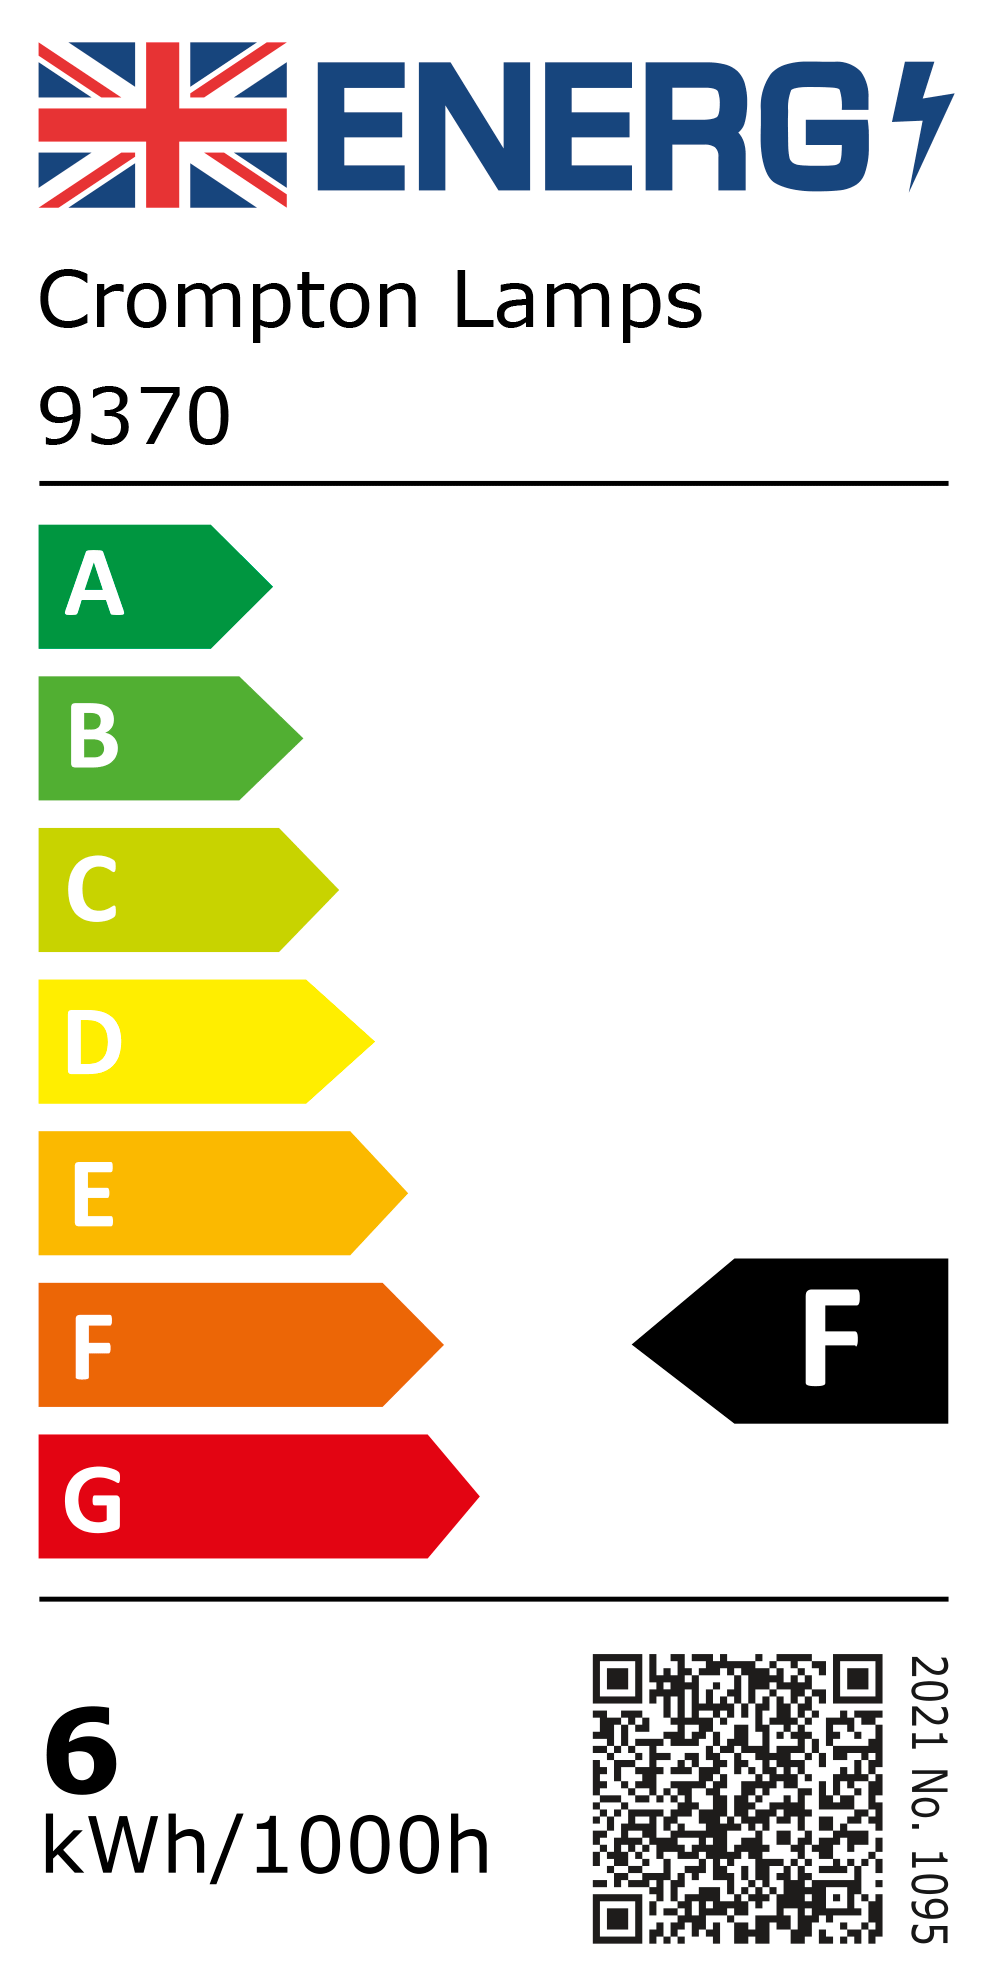 New 2021 Energy Rating Label: Stock Code 9370